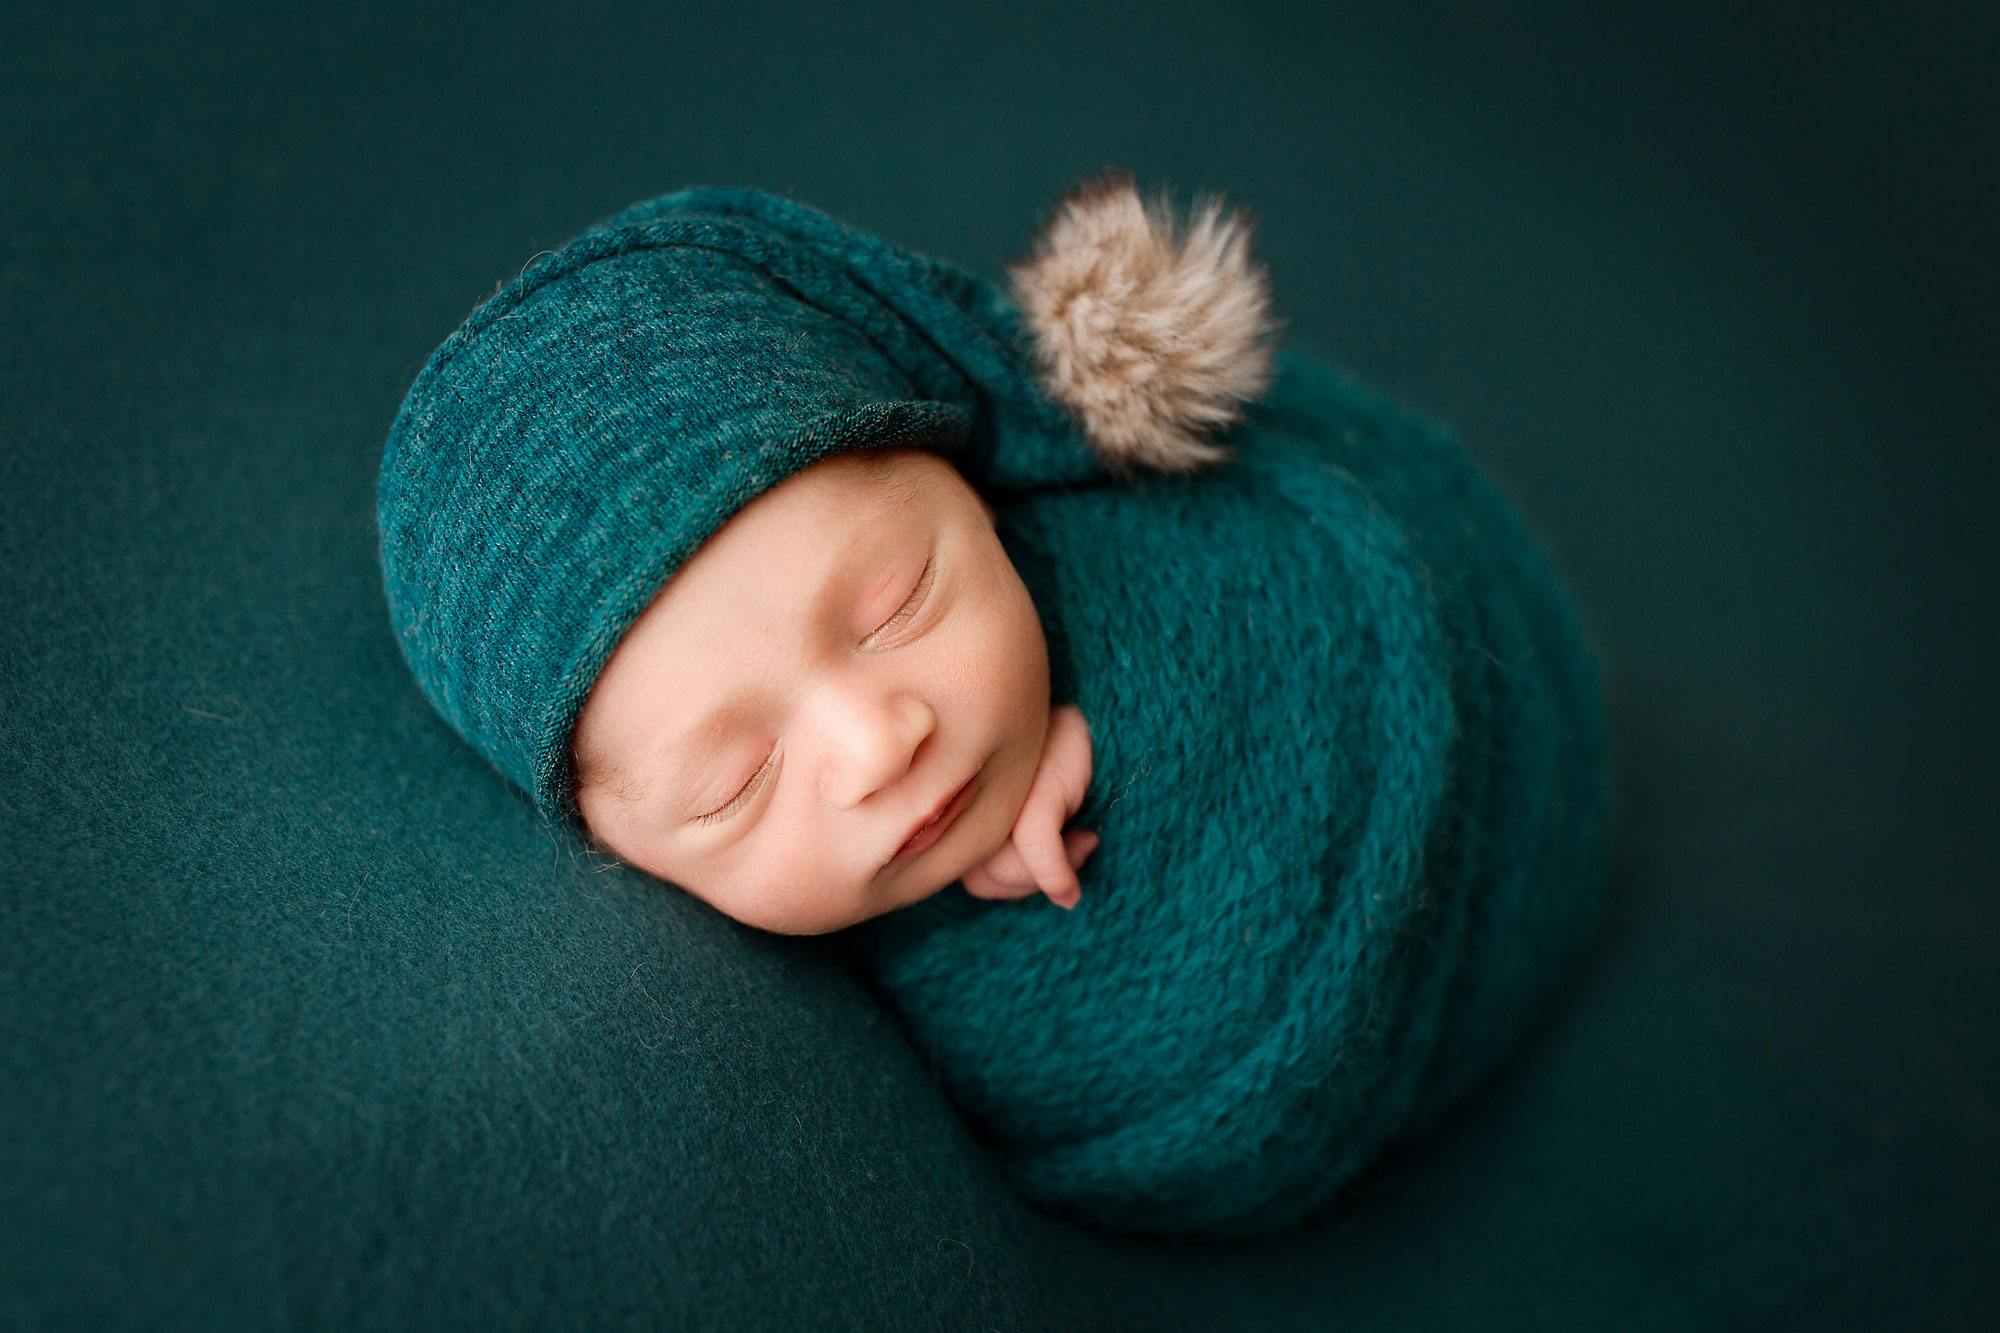 beautiful baby photos new jersey, swaddled baby boy with deep blue-green hat and backdrop